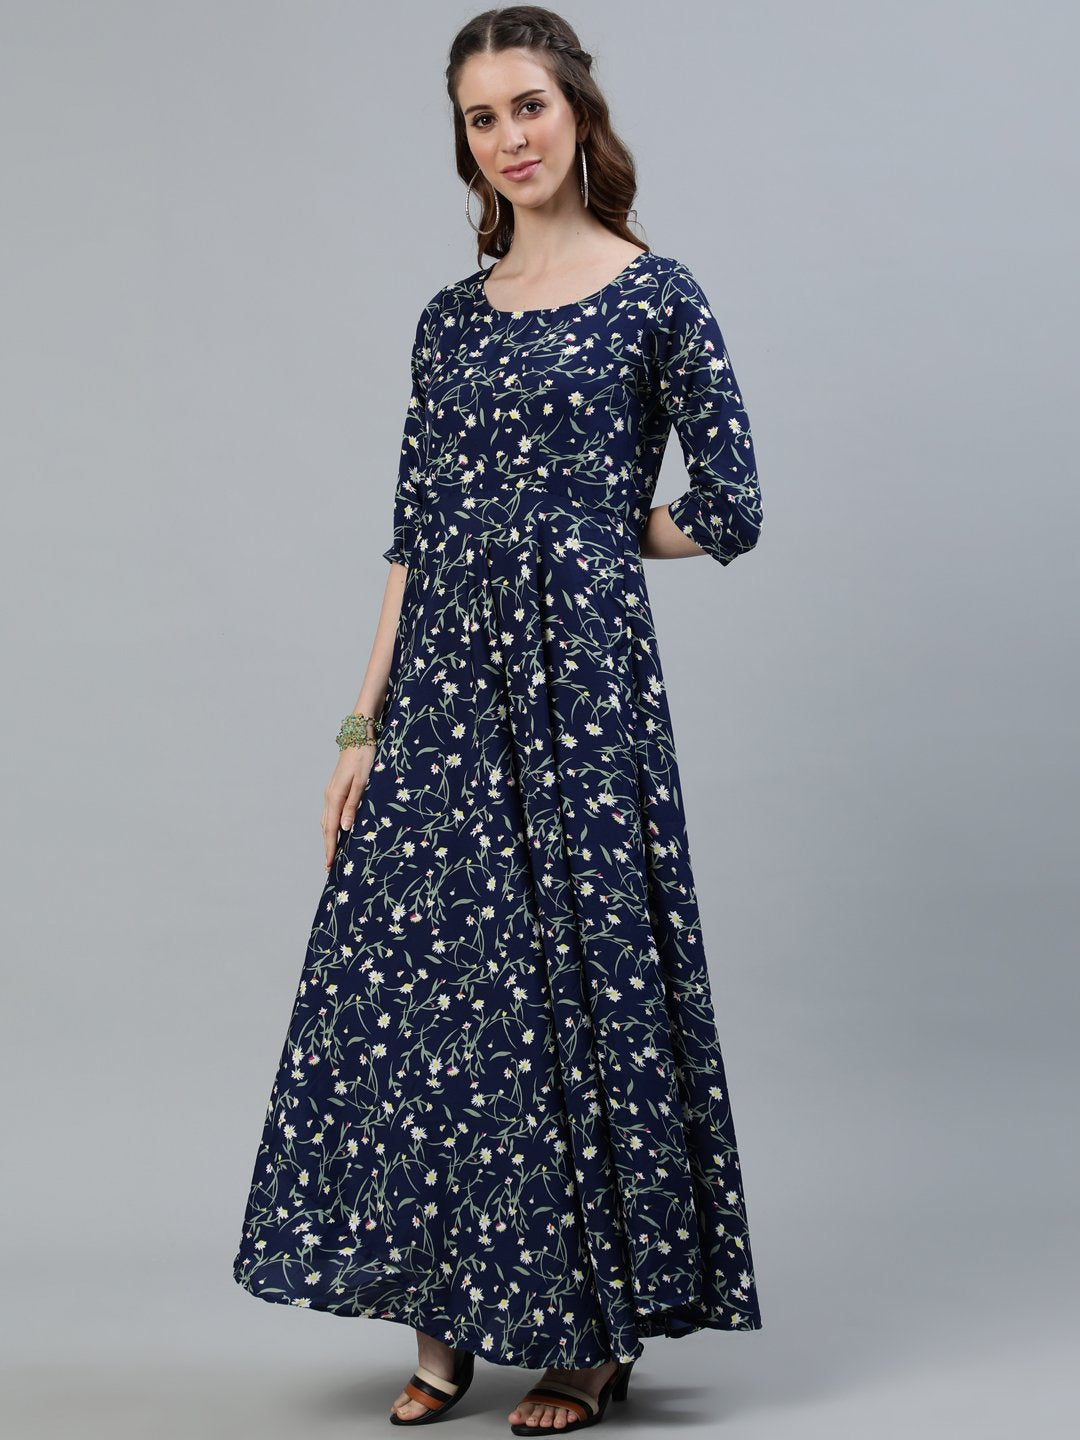 Women's Navy Blue Floral Printed Maxi Dress With Three Quarter Sleeves - Nayo Clothing